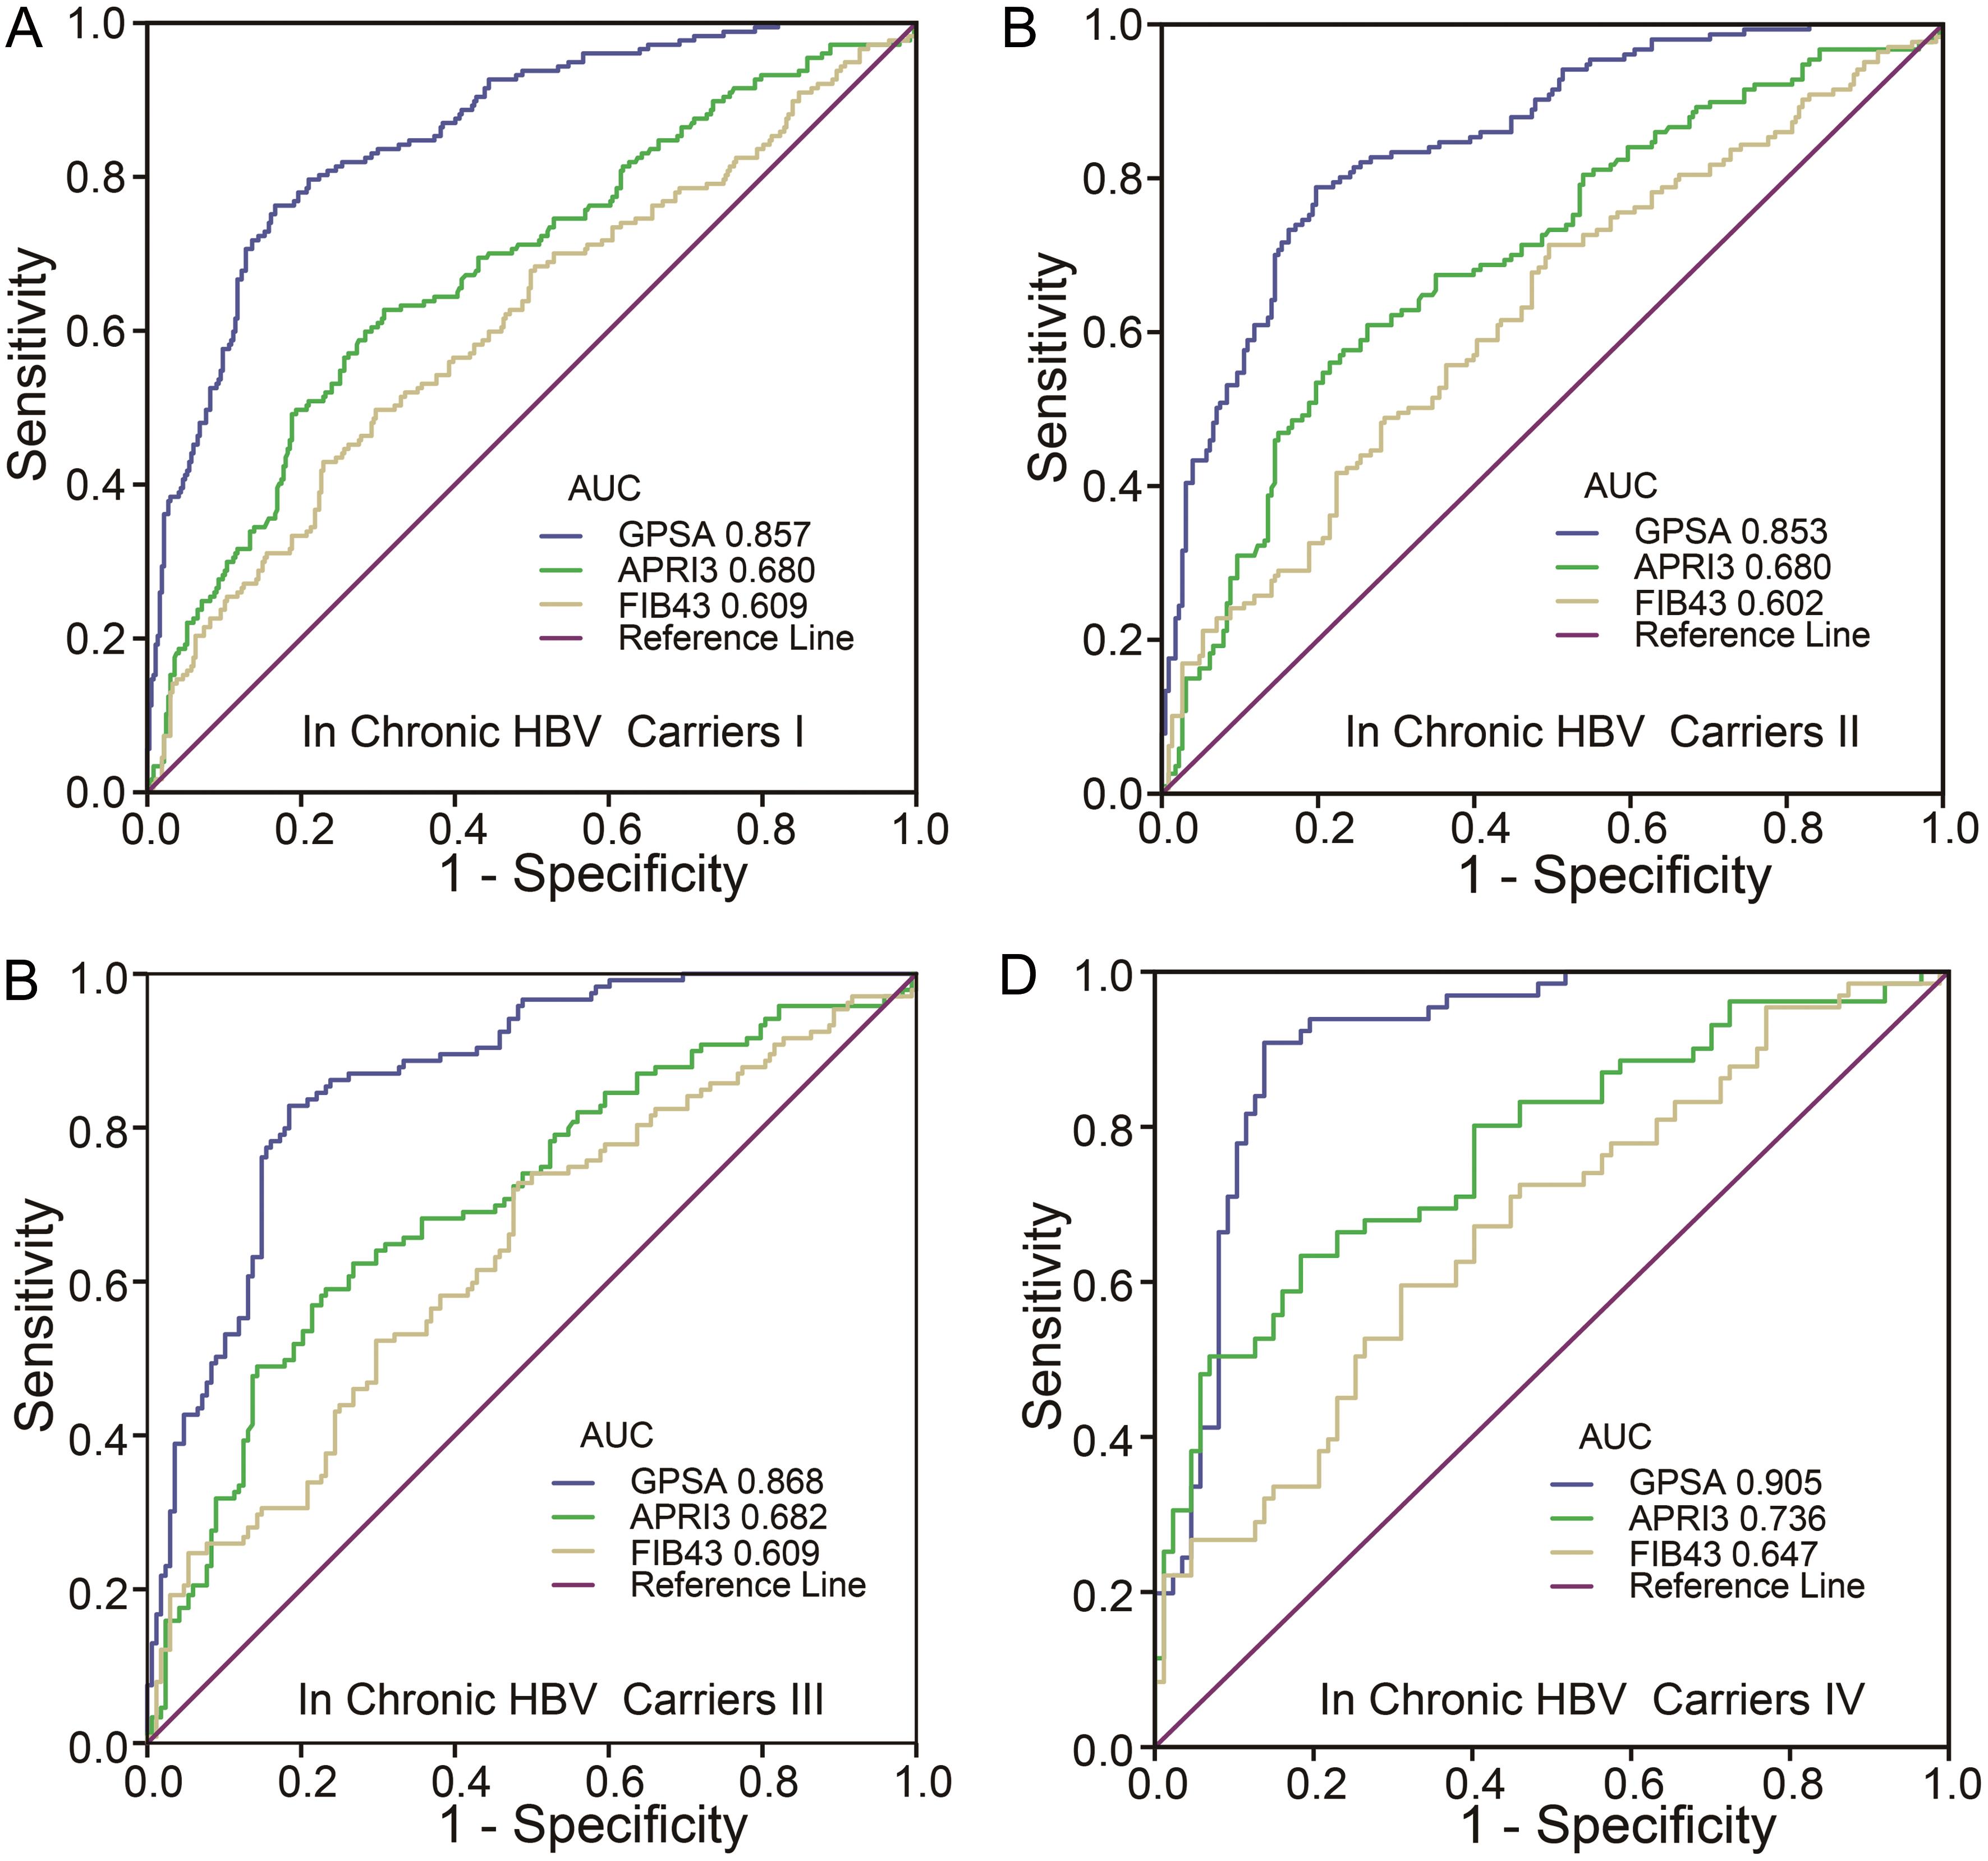 ROC curves of the noninvasive models (GPSA, APRI, and FIB-4) in the four groups of chronic HBV carriers.